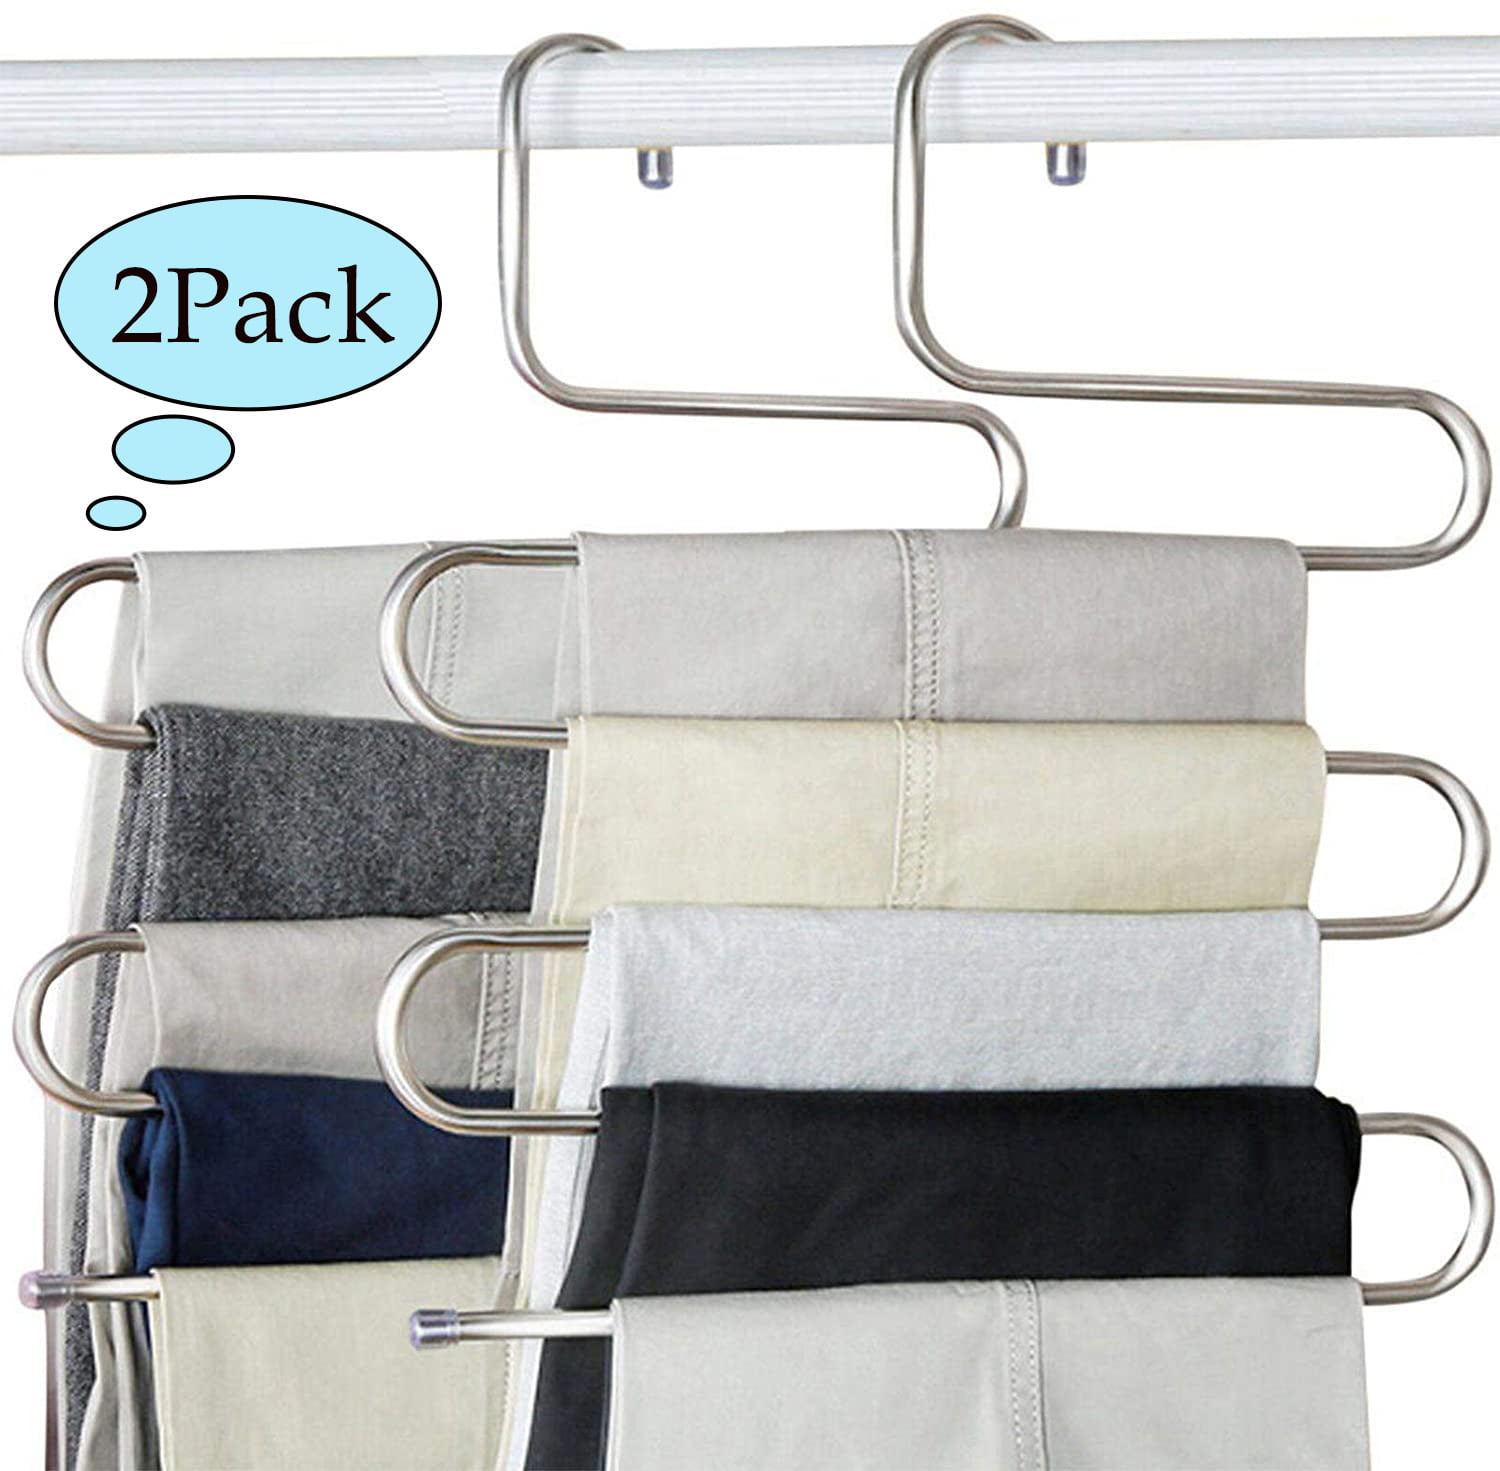 IEOKE Pant Hangers Durable Slack Hangers Multi Layers Stainless Steel Space Saving Clothes Hangers Closet Storage for Jeans Trousers 4 Pack